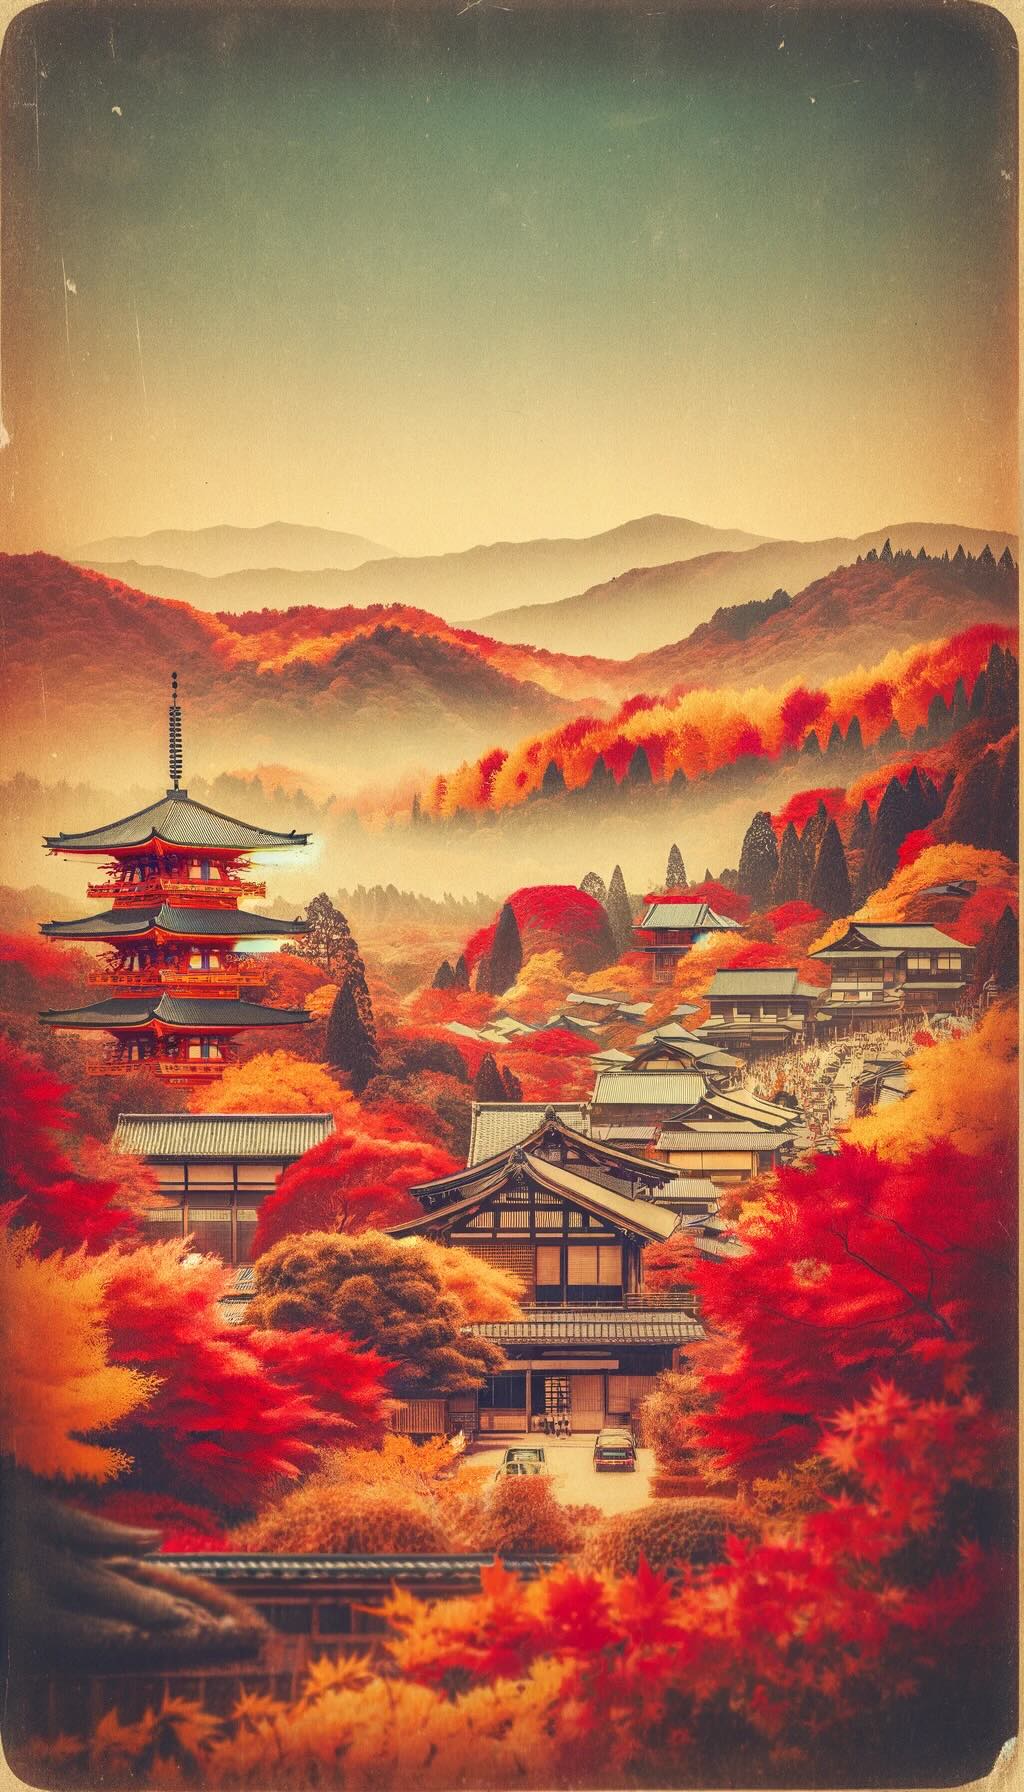 Top places to experience rural autumn colors in Japan beautifully illustrates serene and picturesque landscapes, capturing the vibrant fall foliage in locations such as the Kiyomizu-dera Temple in Kyoto and the historic town of Takayama in the Japanese Alps. The composition evokes a nostalgic and tranquil atmosphere, typical of Japanese autumns.